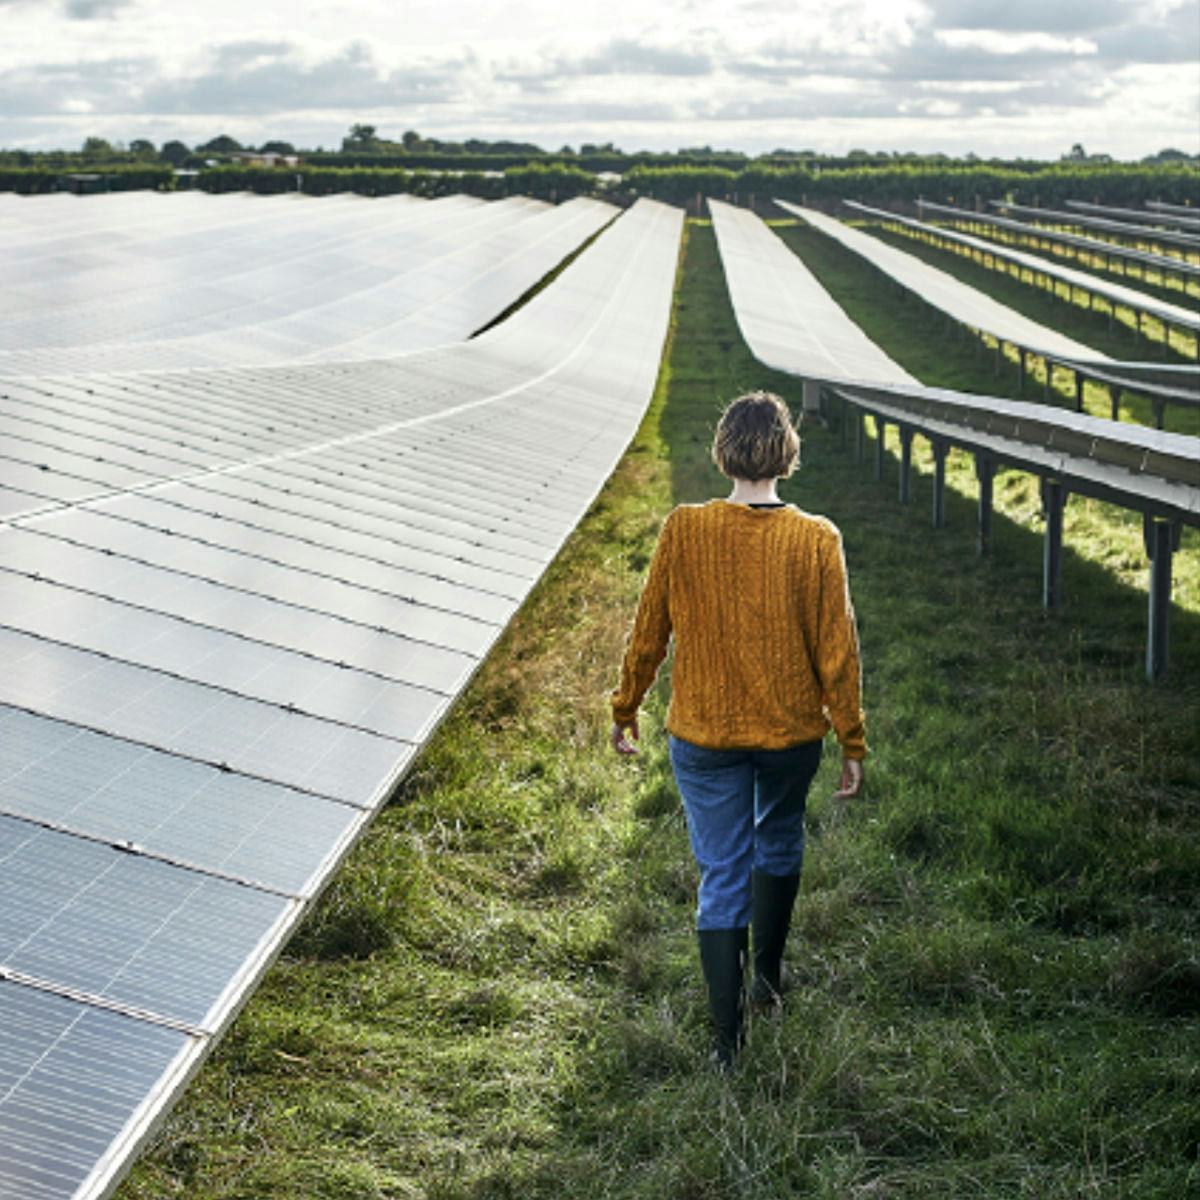 person walking in a field with solar panels